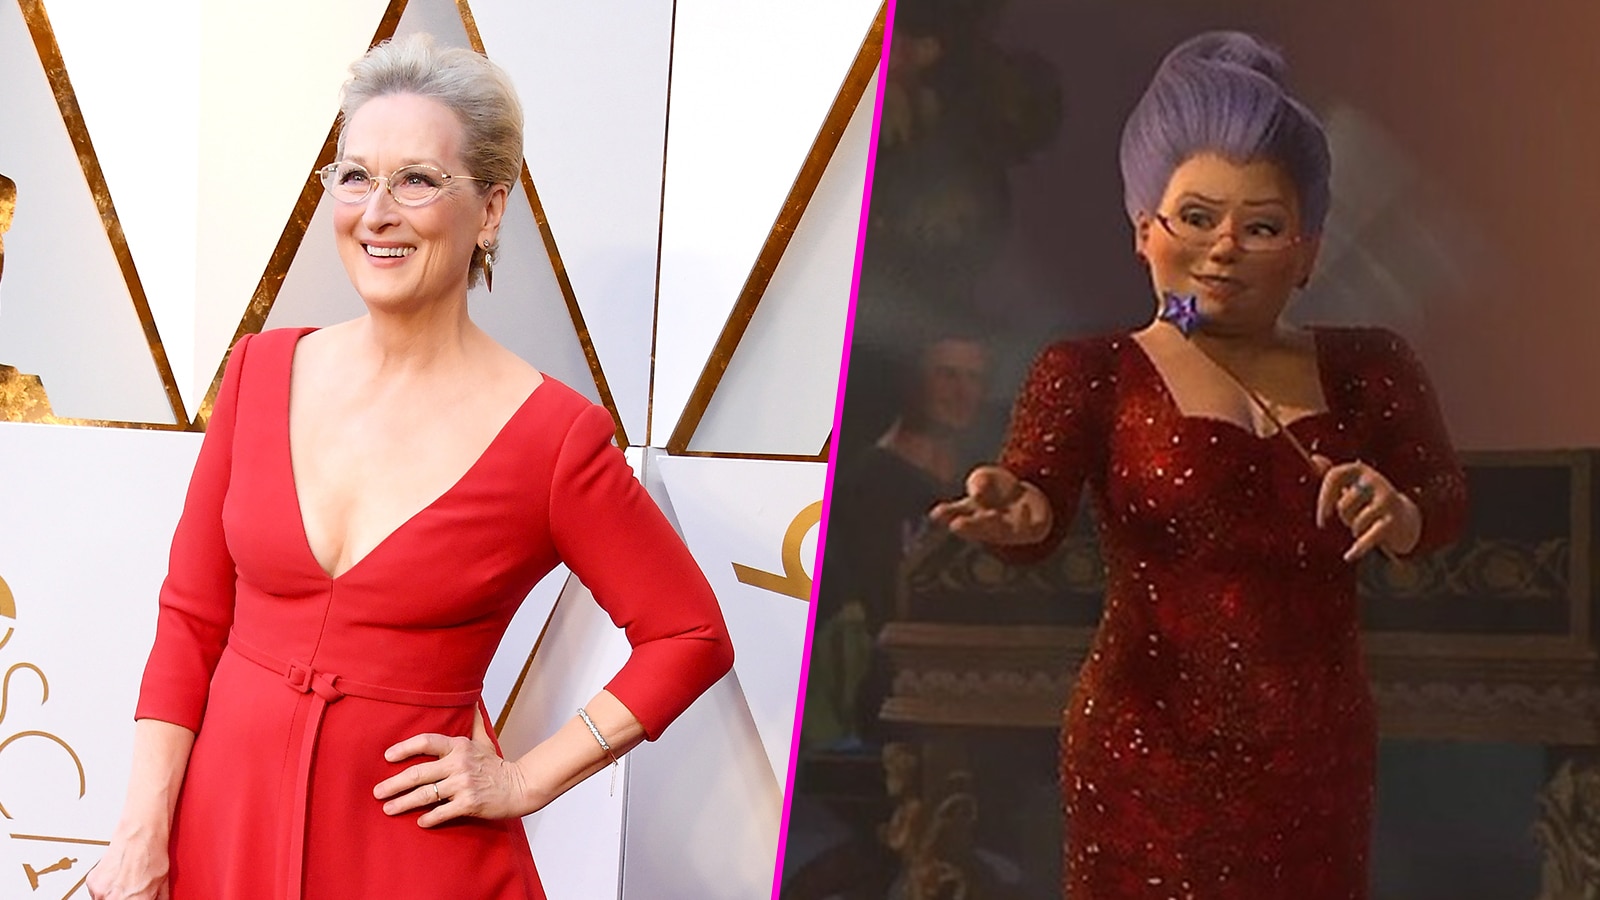 Watch Access Hollywood Interview: Meryl Streep Channeled The Fairy Godmothe...